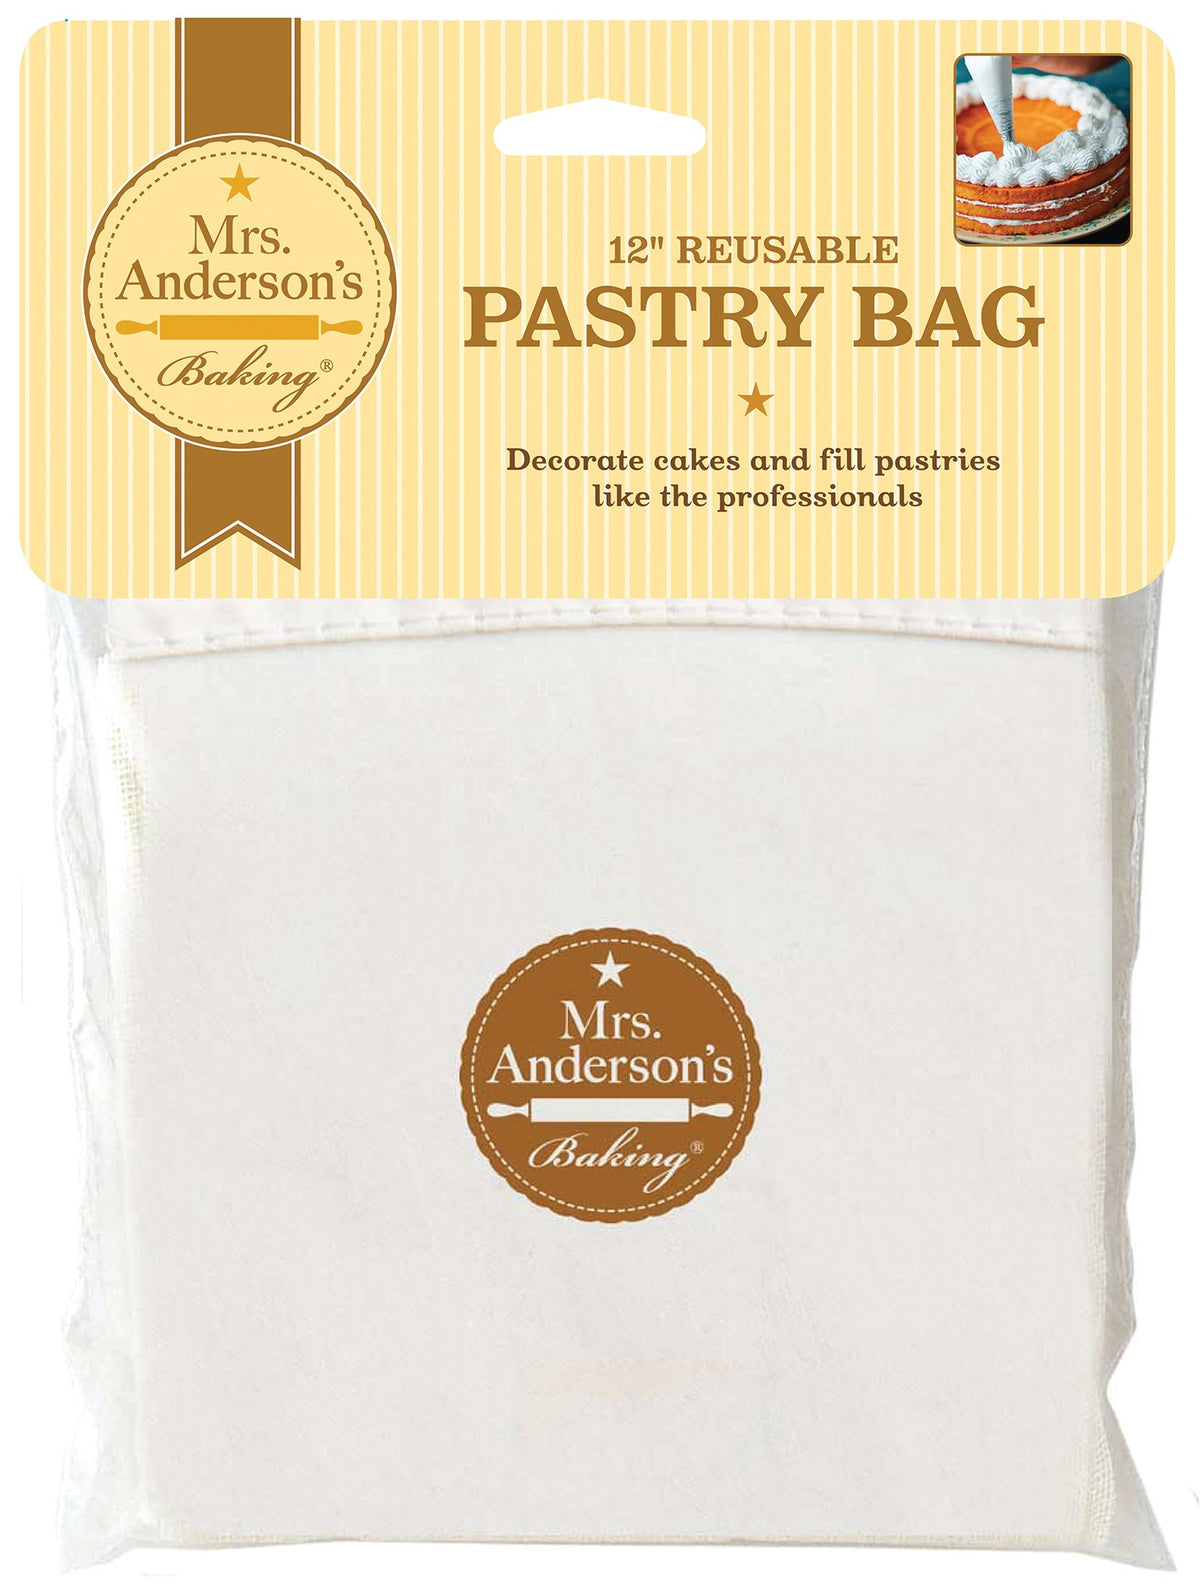 Mrs. Anderson's 93259 Baking Reusable Pastry Bag, 12"